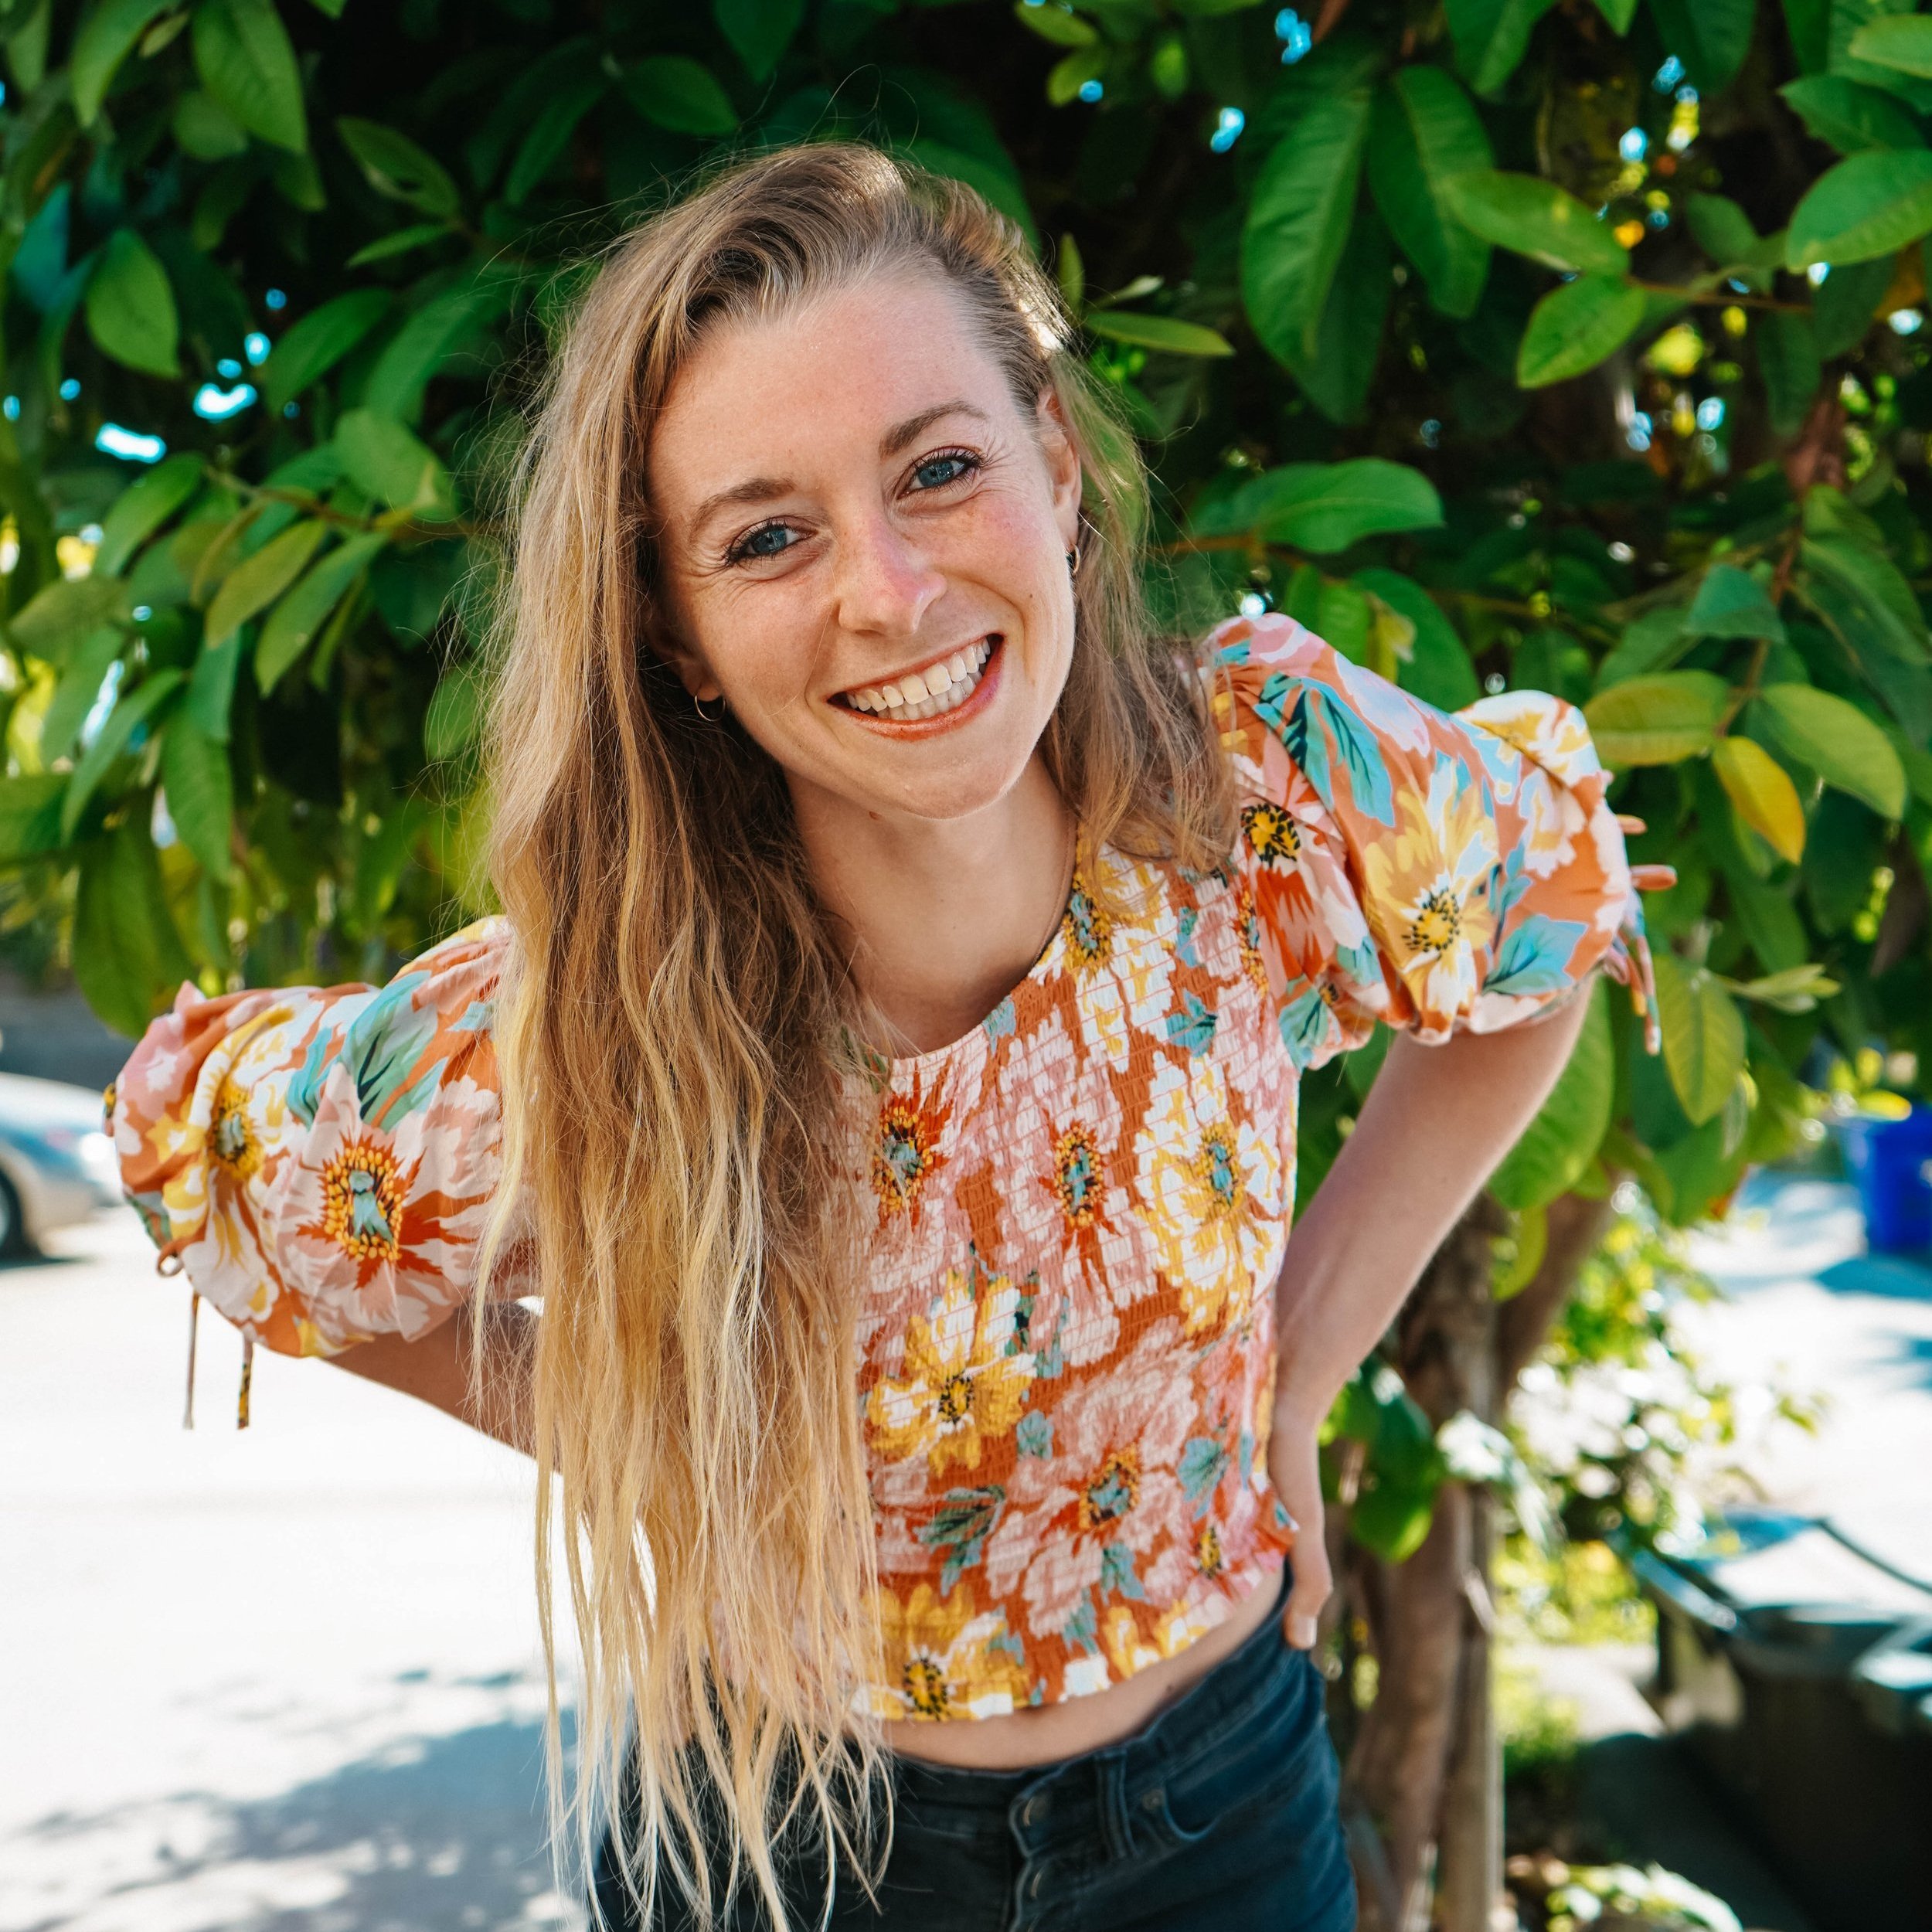 Tara Kemp smiling in a floral top in front of a tree